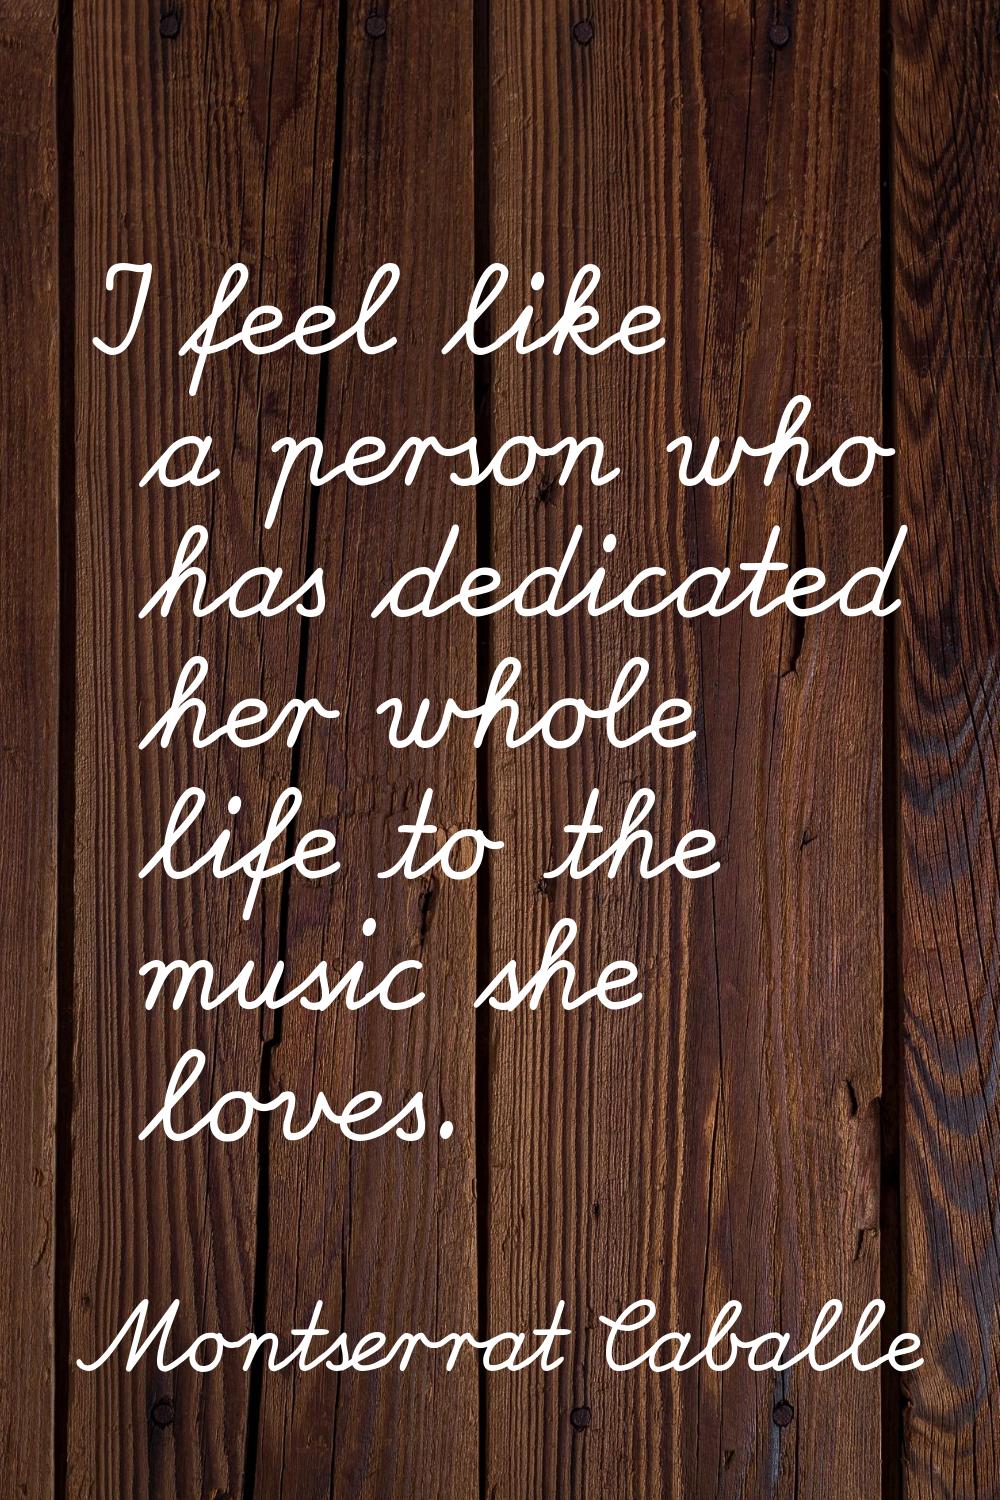 I feel like a person who has dedicated her whole life to the music she loves.